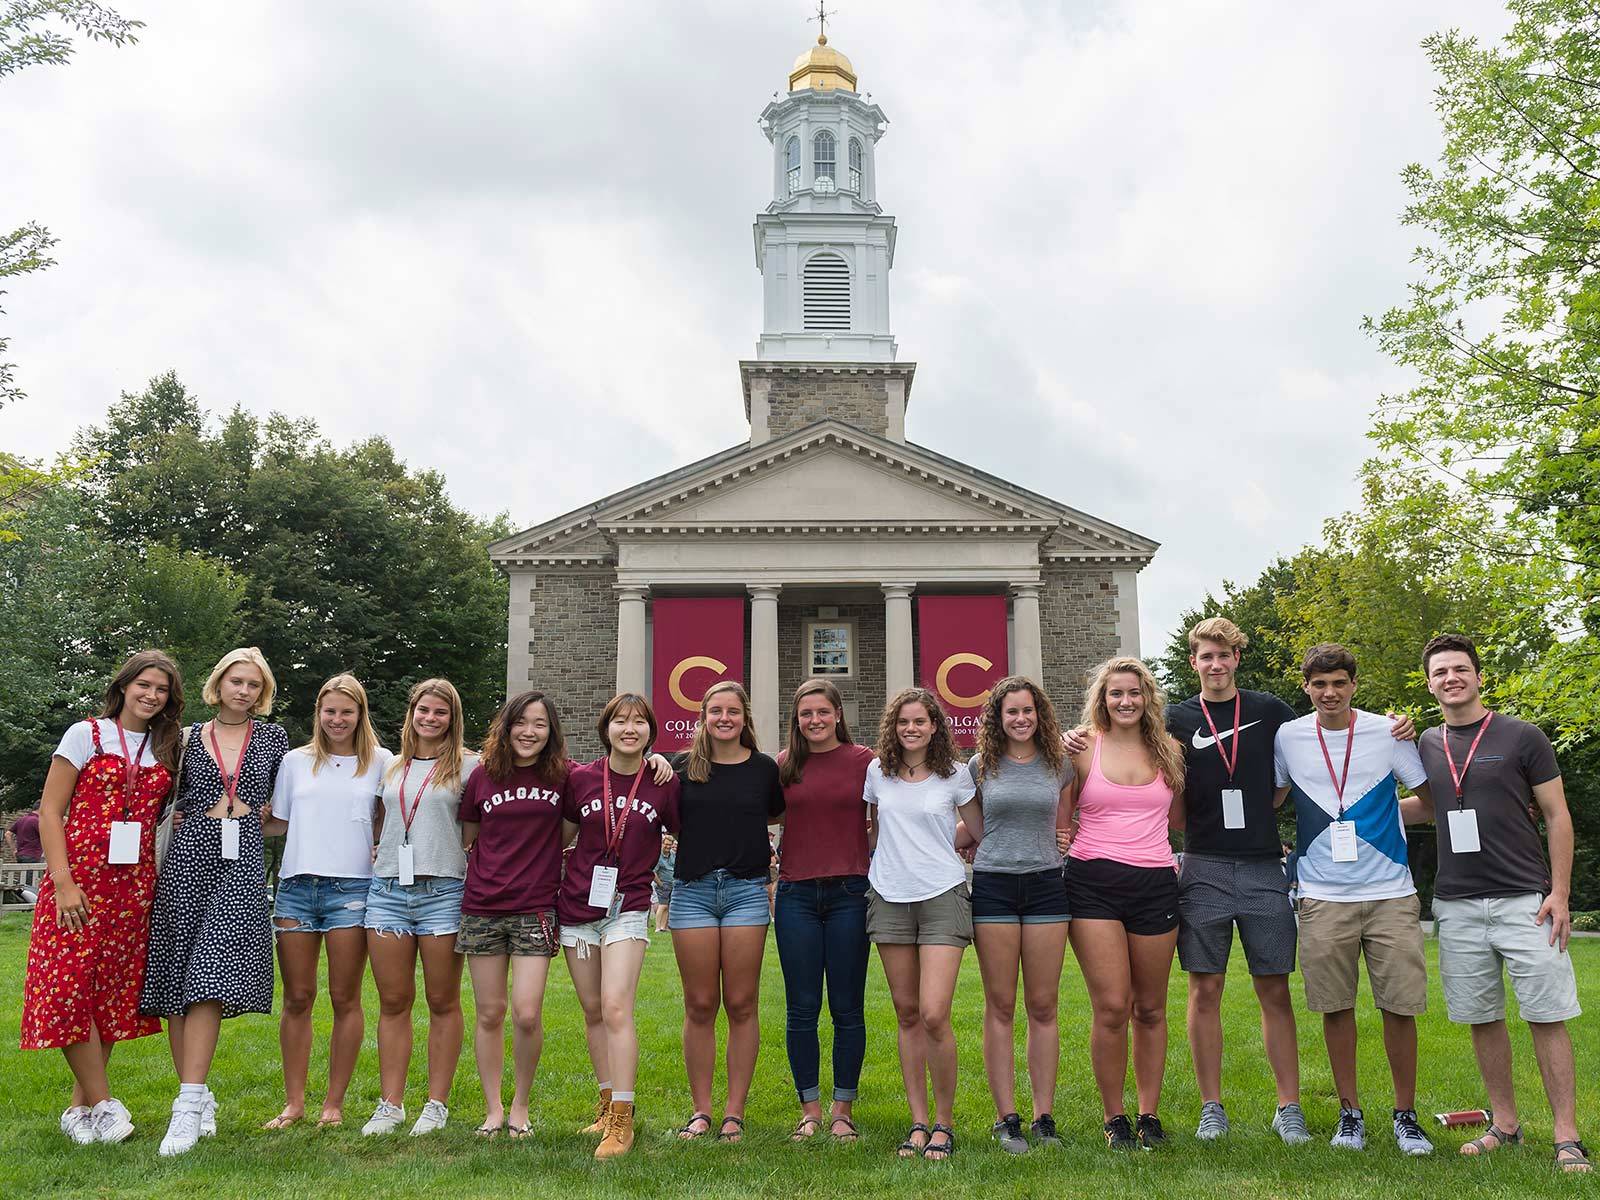 First-year students take a group photo together in front of Colgate Memorial Chapel